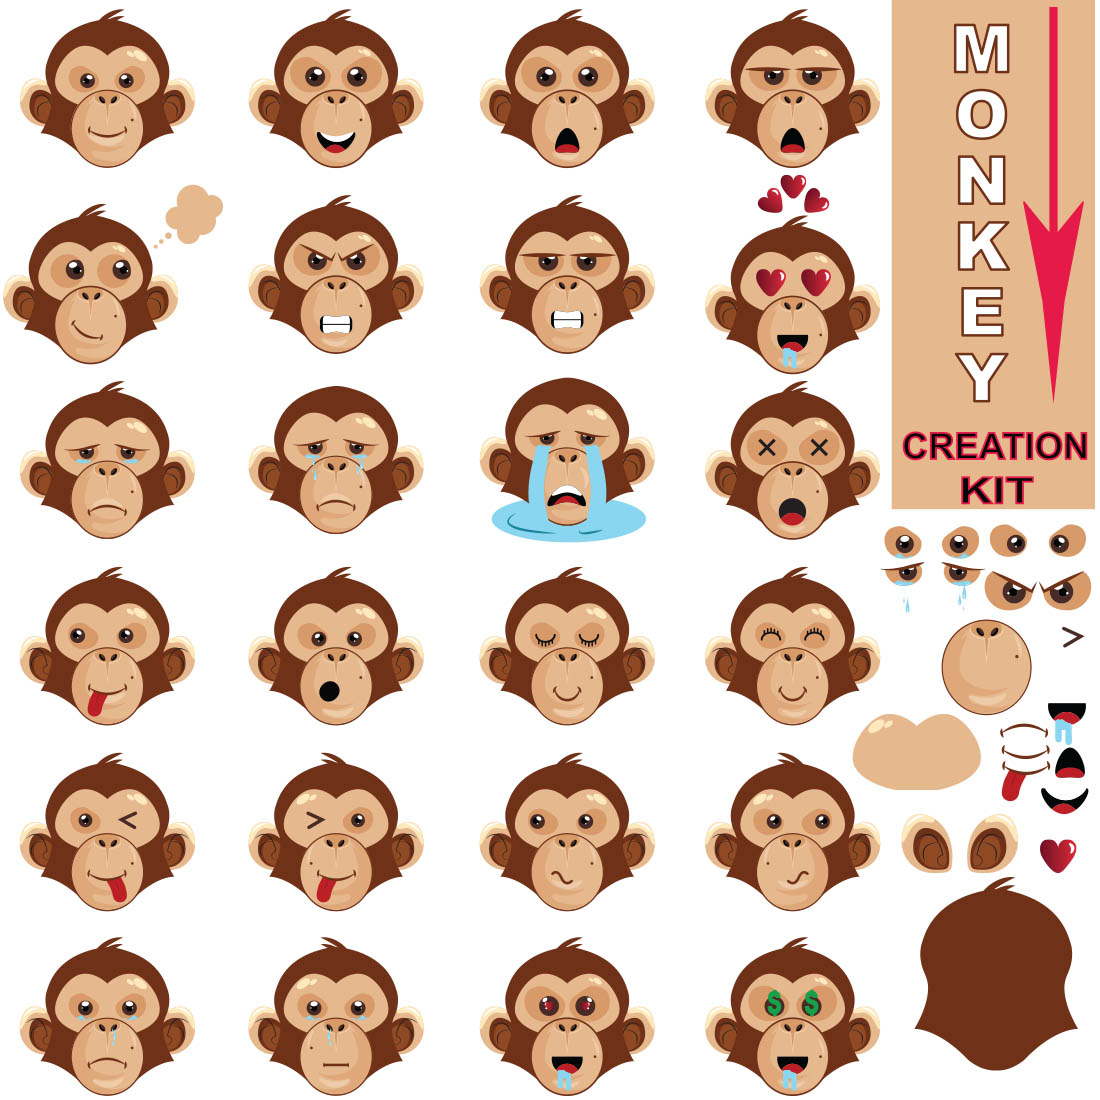 Set Collection of Different Monkey Face Emoji Expressions main cover.